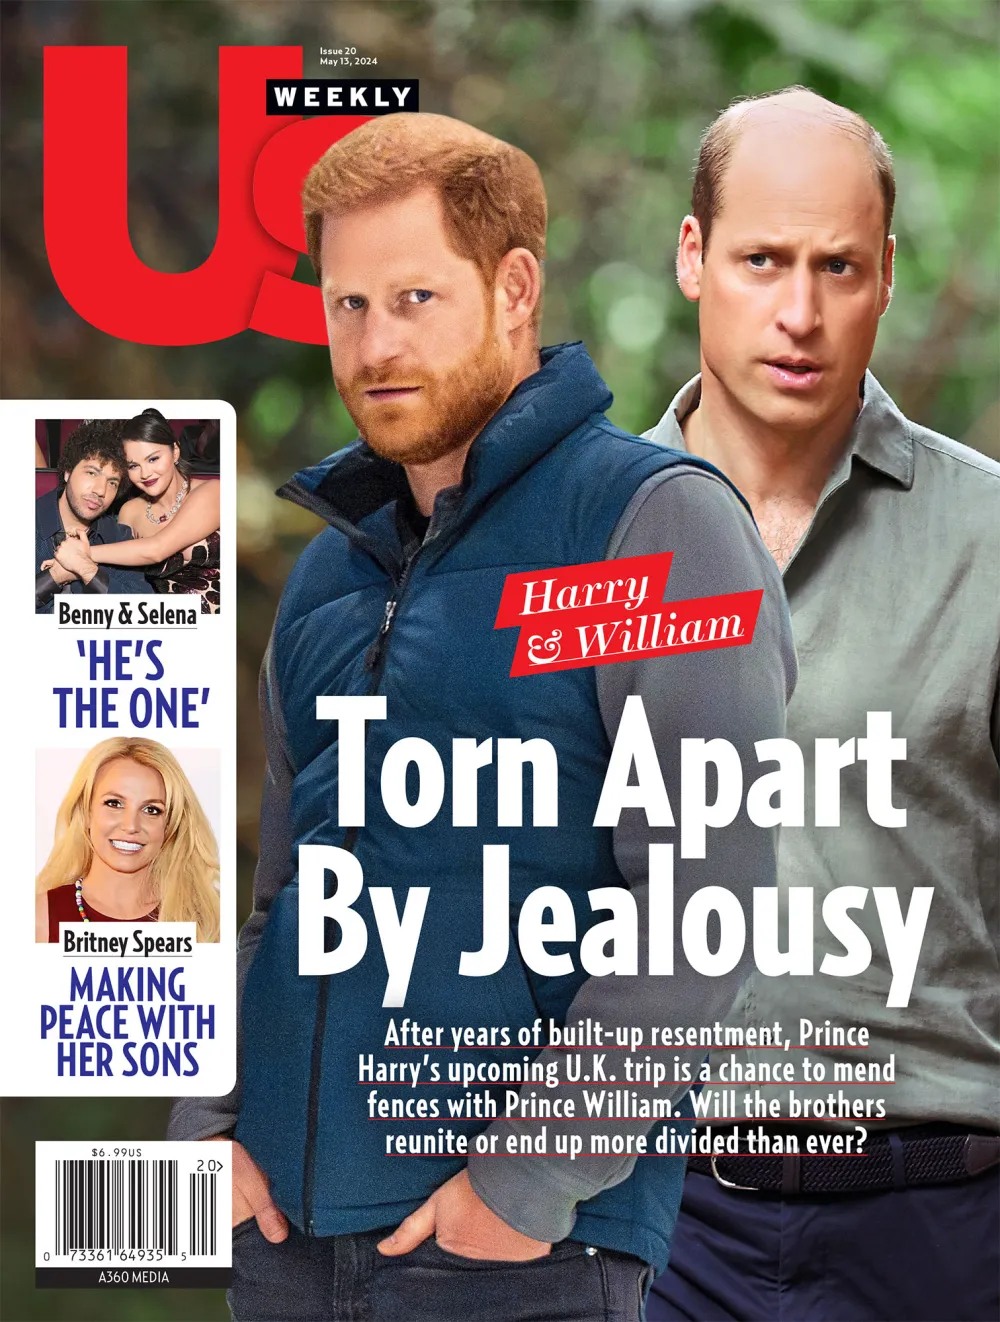 Us Weekly: Prince William is ‘envious’ of Harry’s freedom & accomplishments